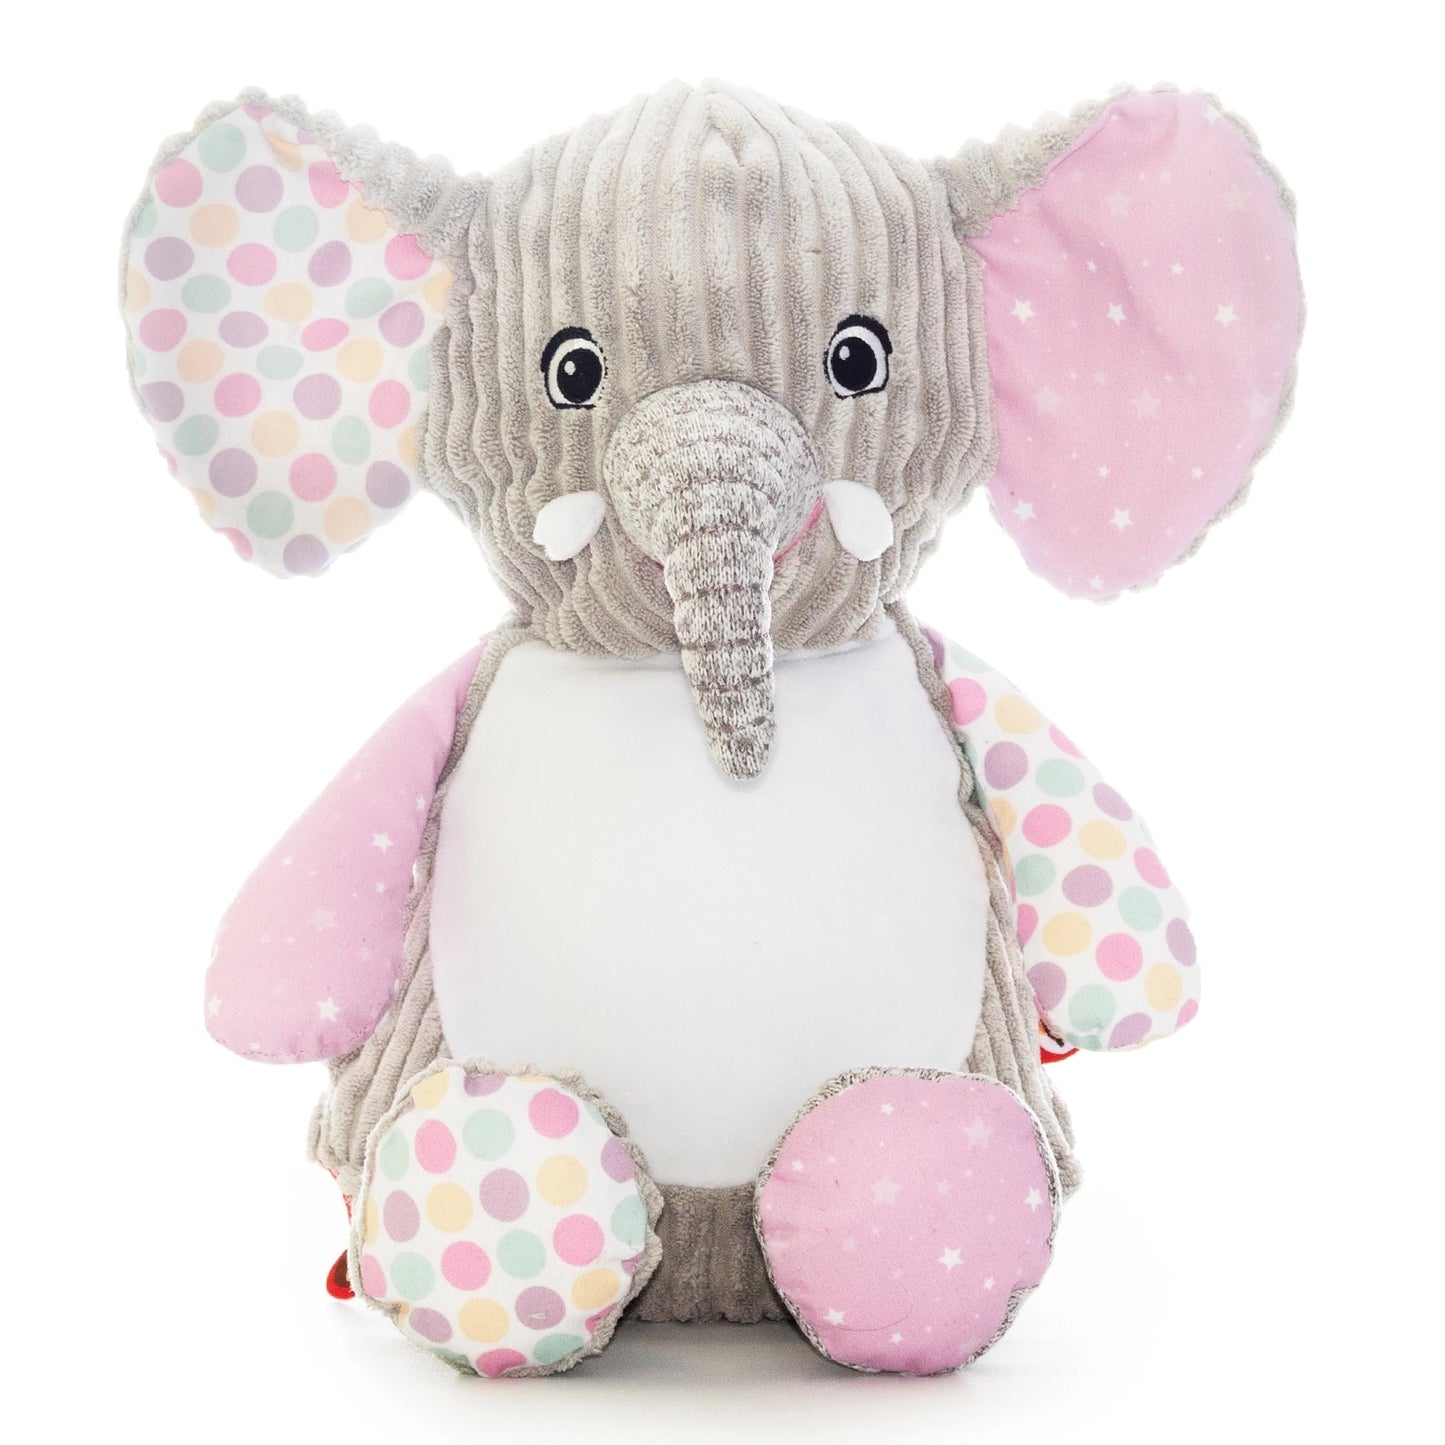 Sensory Elephant Cubby with personalised embroidery